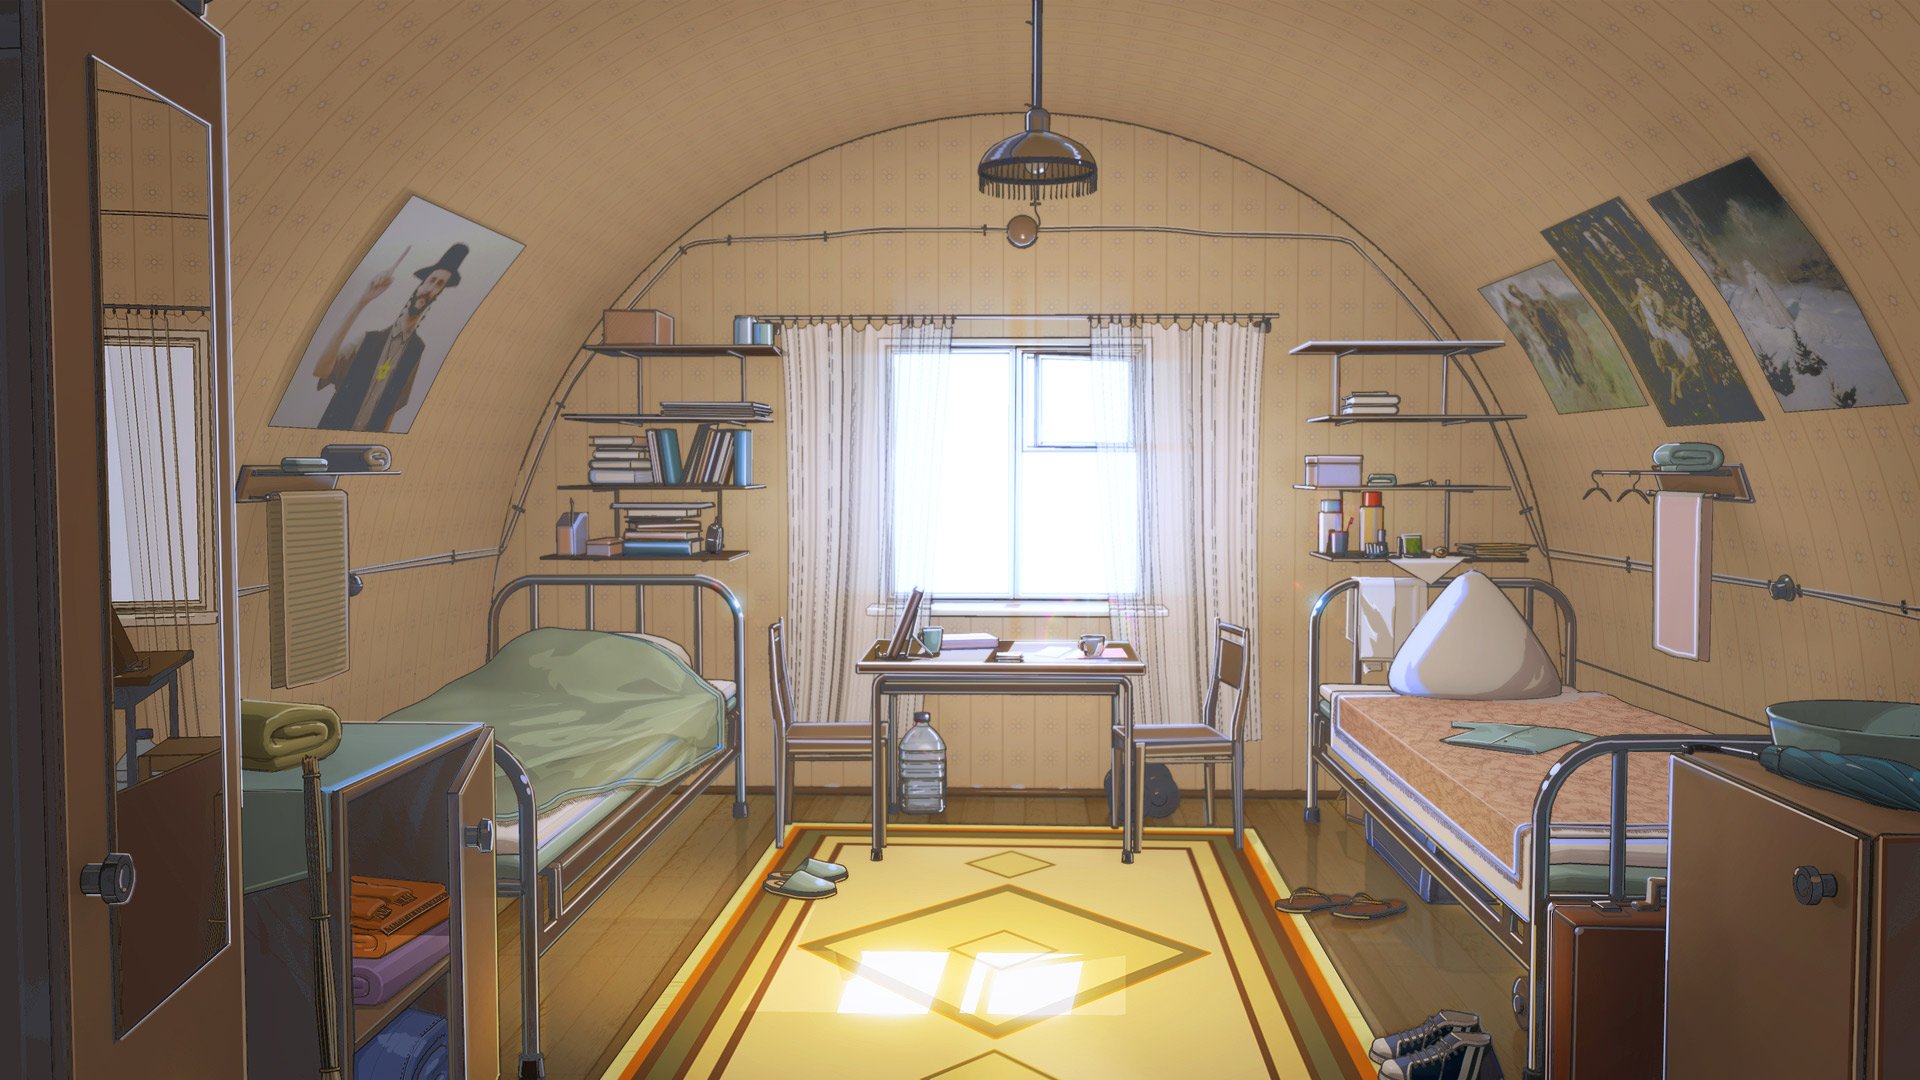 Room camp. Дом Слави Бесконечное лето. Домик Слави Бесконечное лето. Комната Слави Бесконечное лето. Домик Ольги Дмитриевны Бесконечное лето.